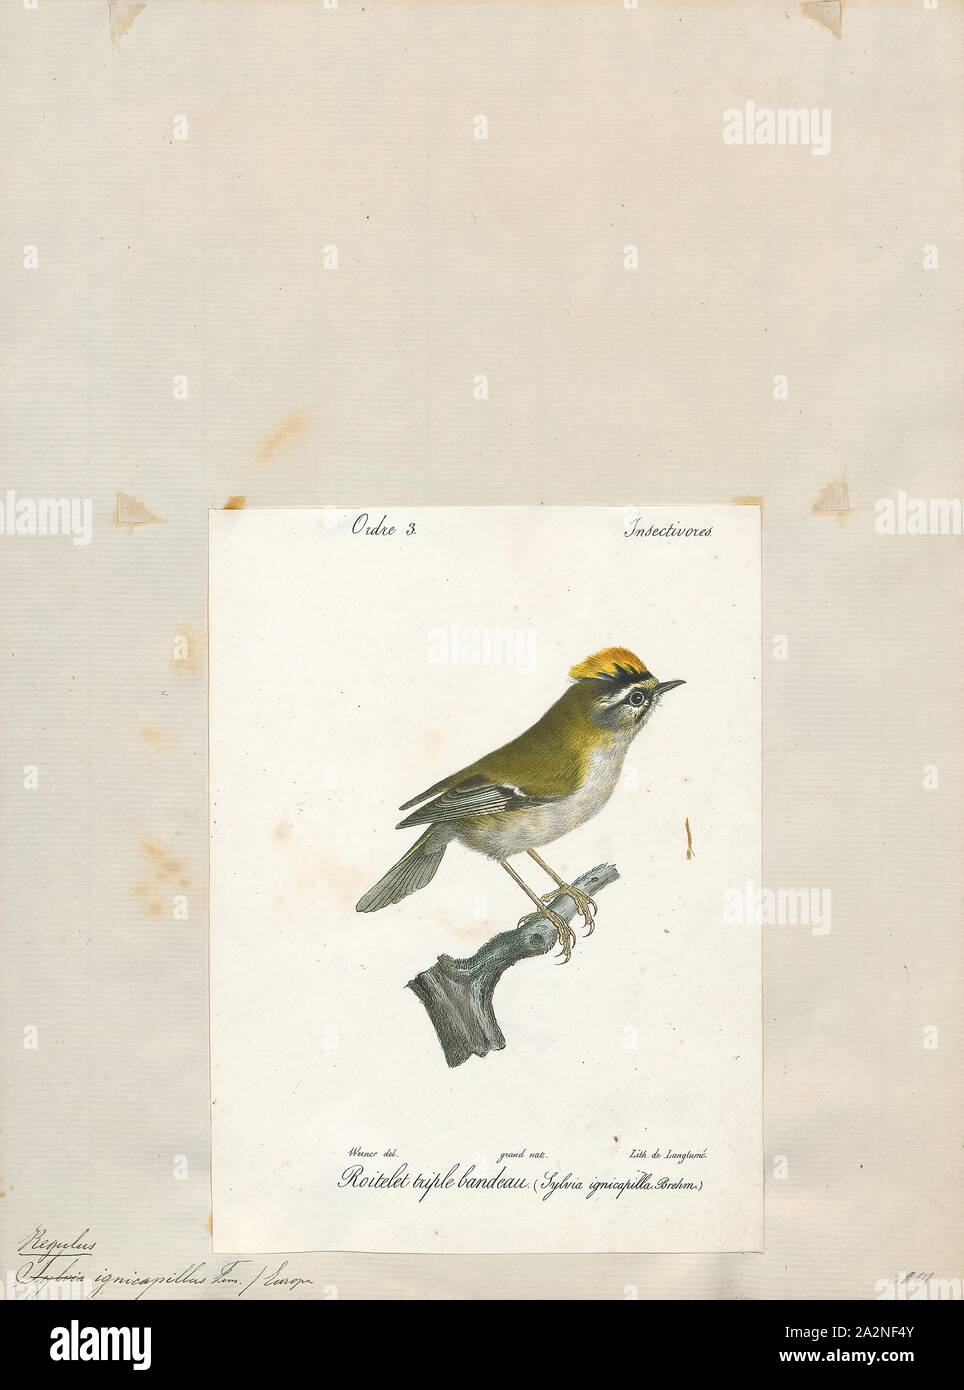 Regulus ignicapillus, Print, The common firecrest (Regulus ignicapilla) also known as the firecrest, is a very small passerine bird in the kinglet family. It breeds in most of temperate Europe and northwestern Africa, and is partially migratory, with birds from central Europe wintering to the south and west of their breeding range. Firecrests in the Balearic Islands and north Africa are widely recognised as a separate subspecies, but the population on Madeira, previously also treated as a subspecies, is now treated as a distinct species, the Madeira firecrest, Regulus madeirensis. A fossil Stock Photo